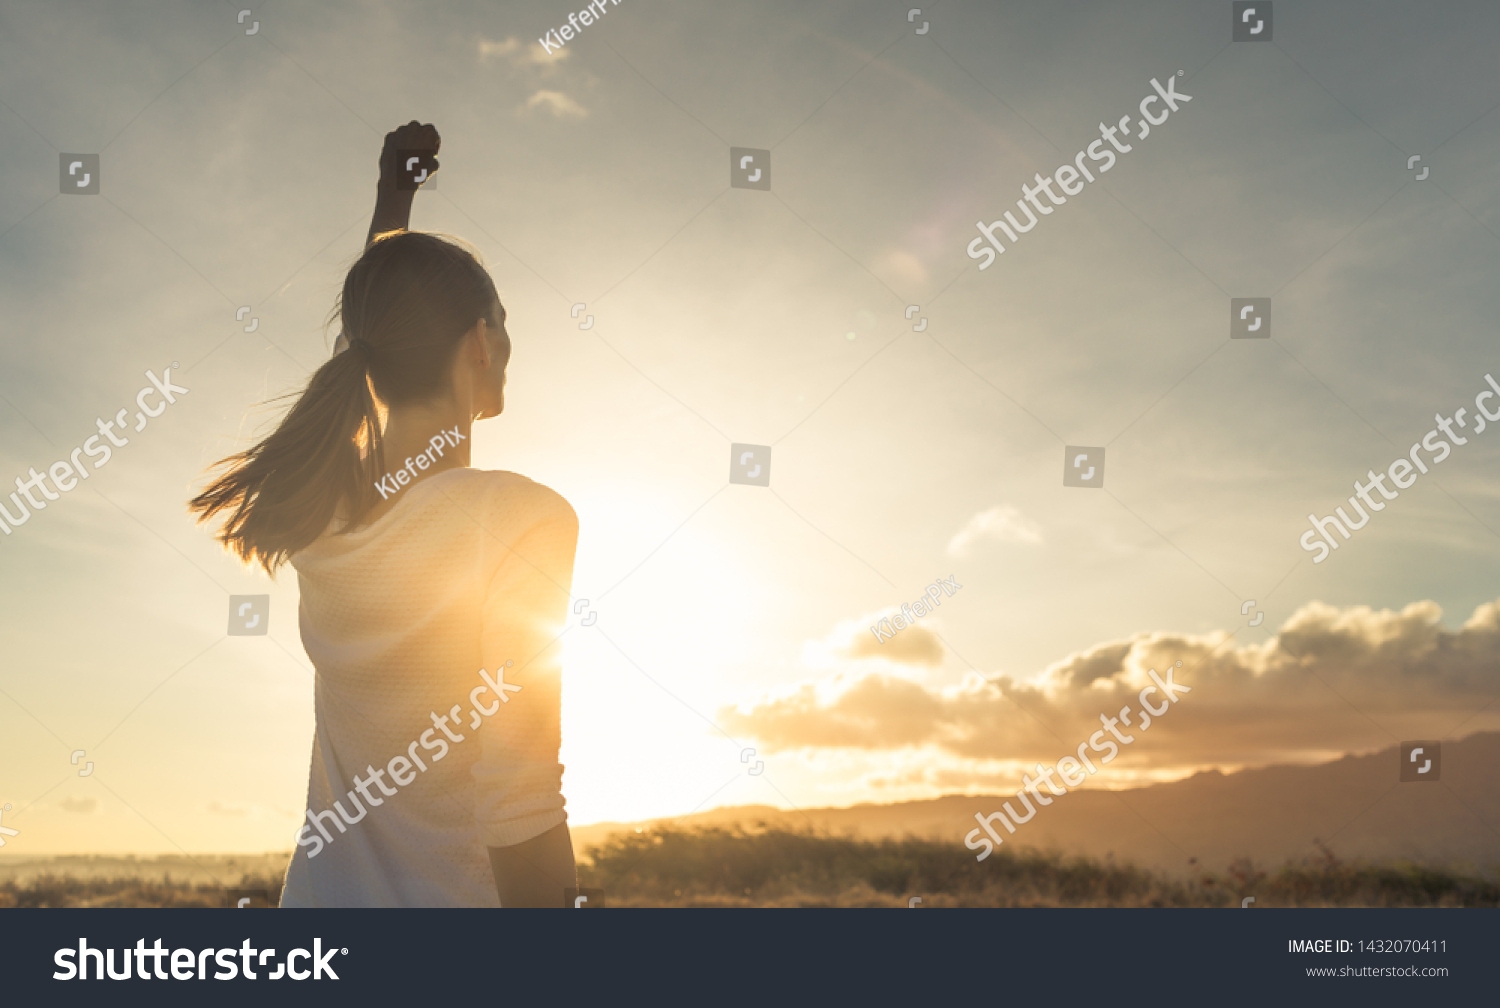 Strong, determined, confident woman with her fist up in the air facing sunset. #1432070411